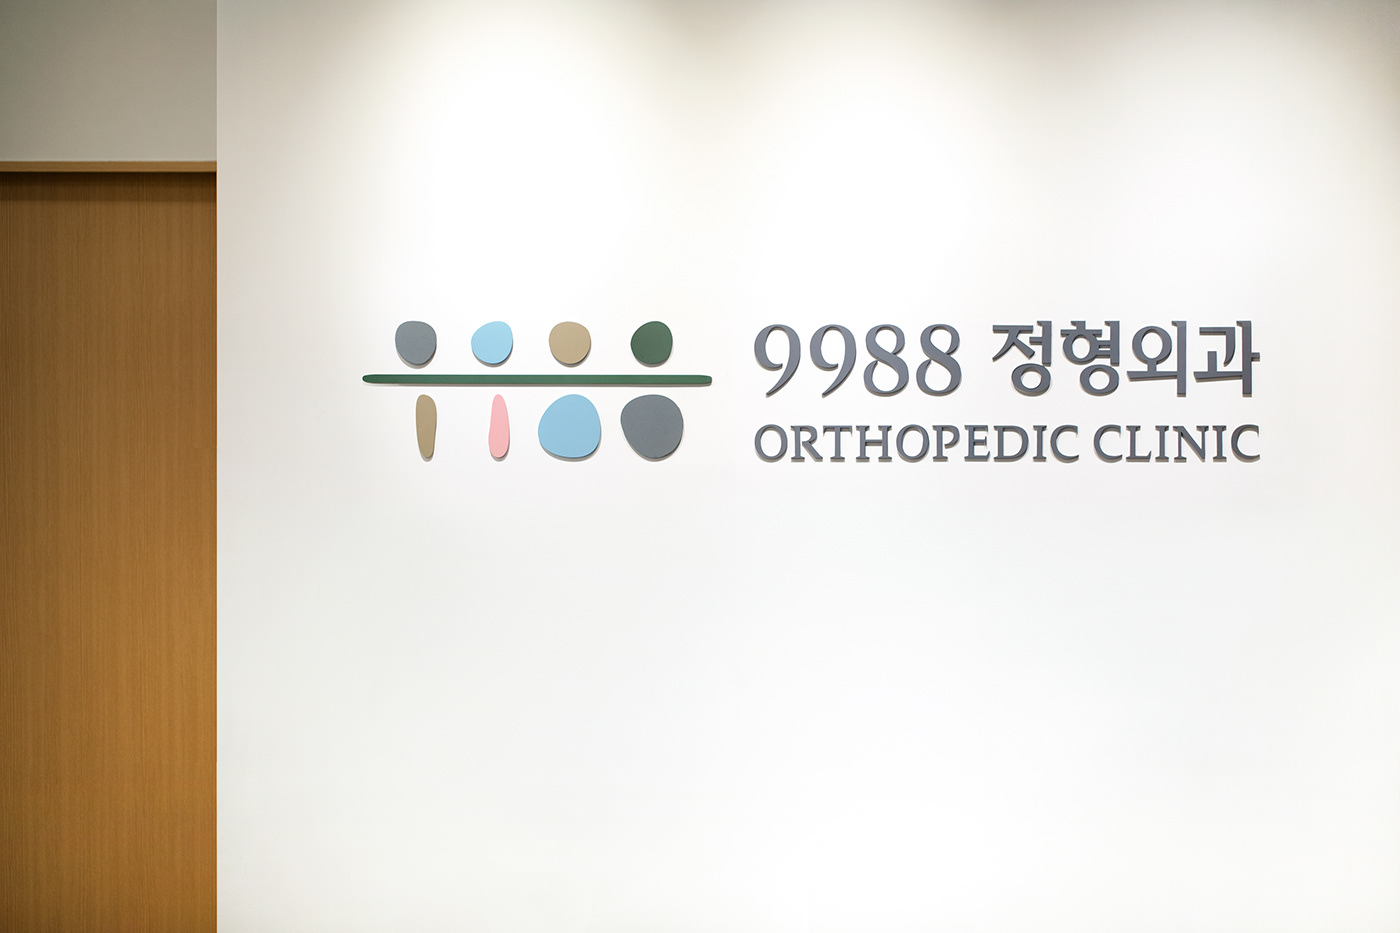 clinic Health hospital medical numbers orthopedic stone pictogram therapy Wellness